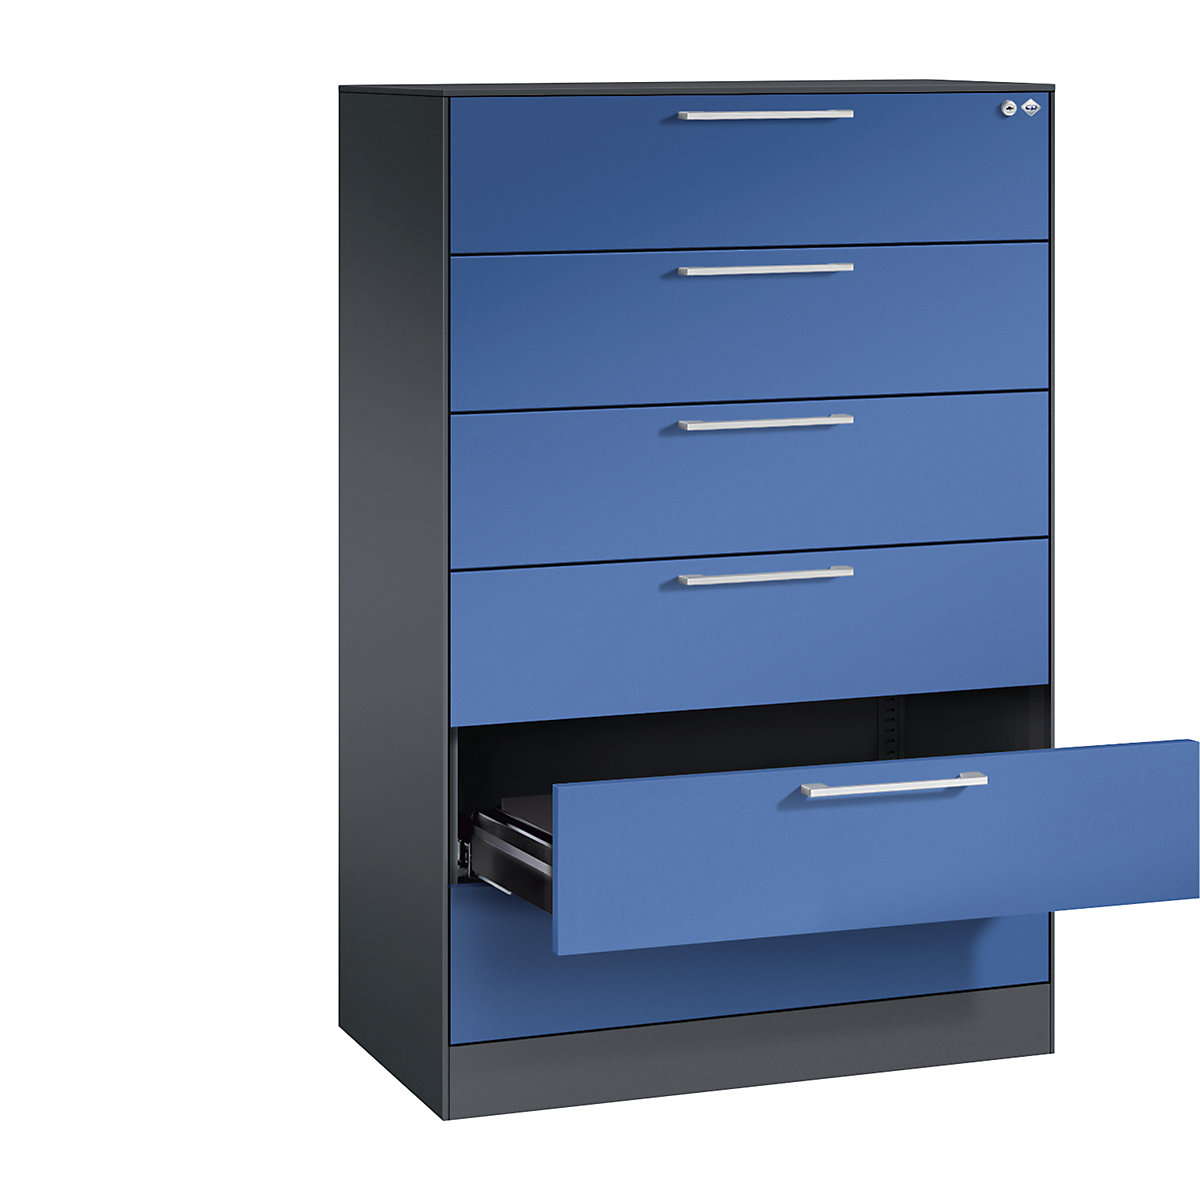 ASISTO card file cabinet – C+P, height 1292 mm, with 6 drawers, A5 landscape, black grey/gentian blue-7